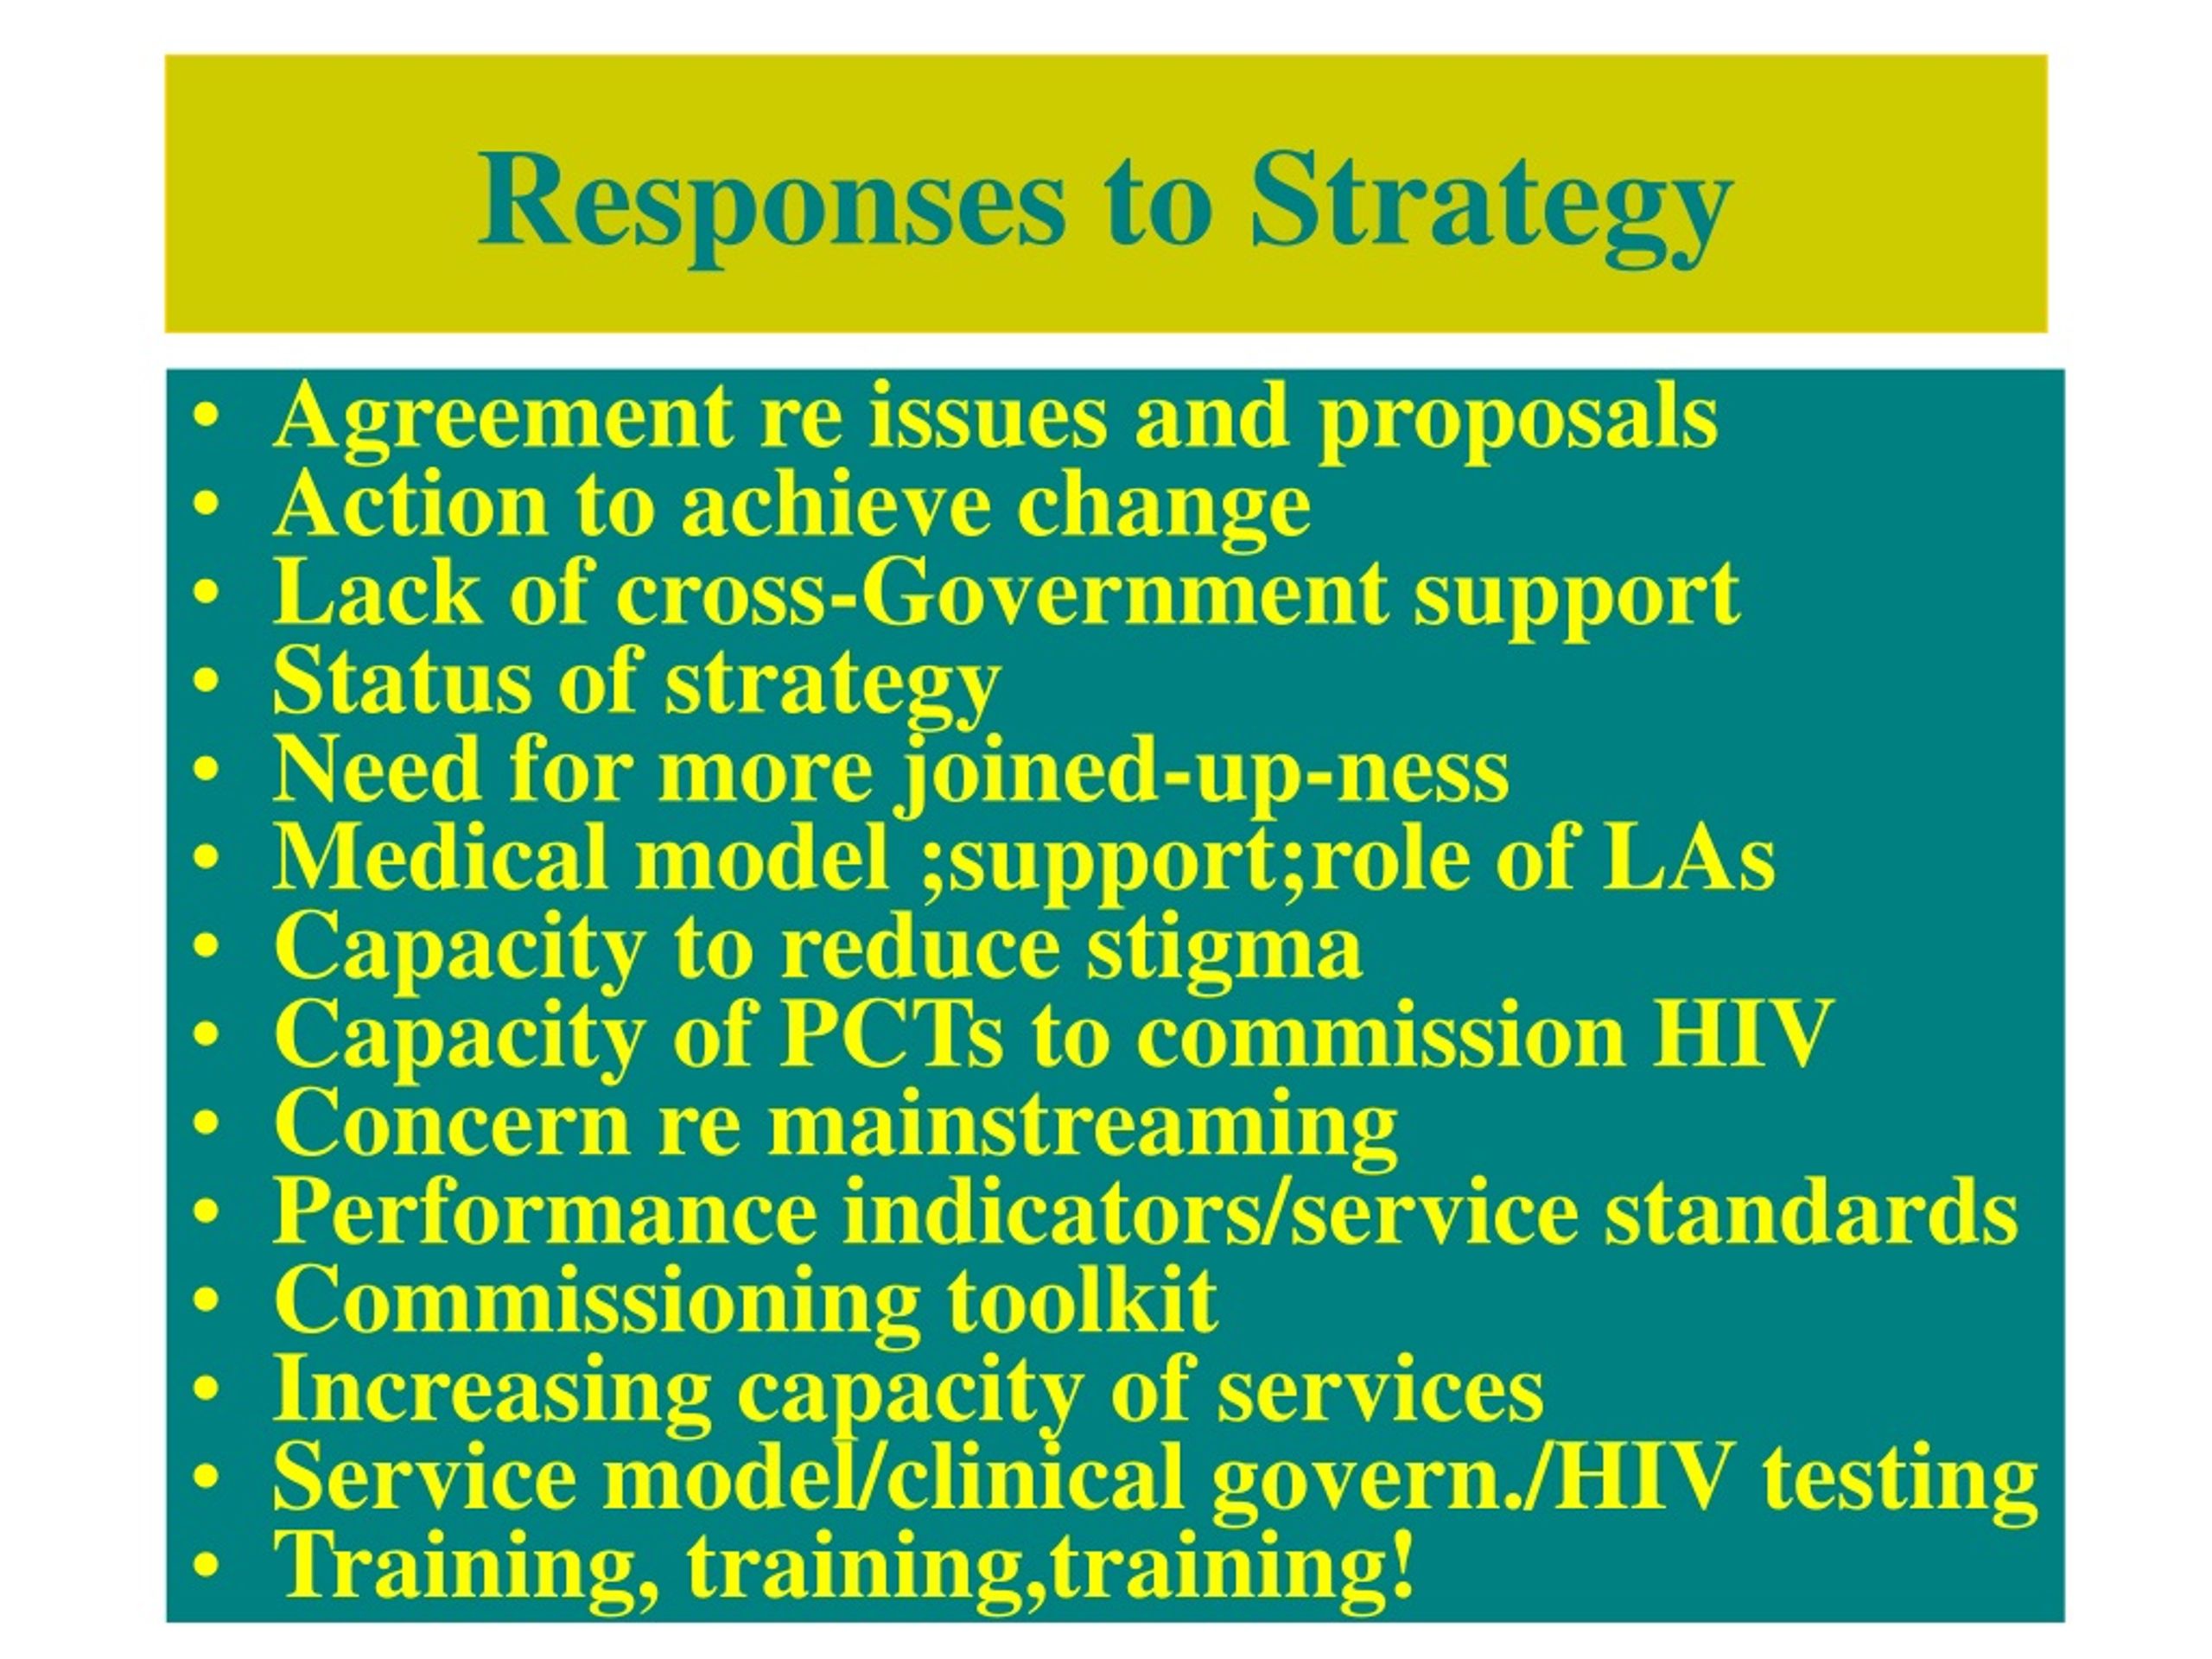 Ppt The National Sexual Health And Hiv Strategy Powerpoint Presentation Id1296377 0492